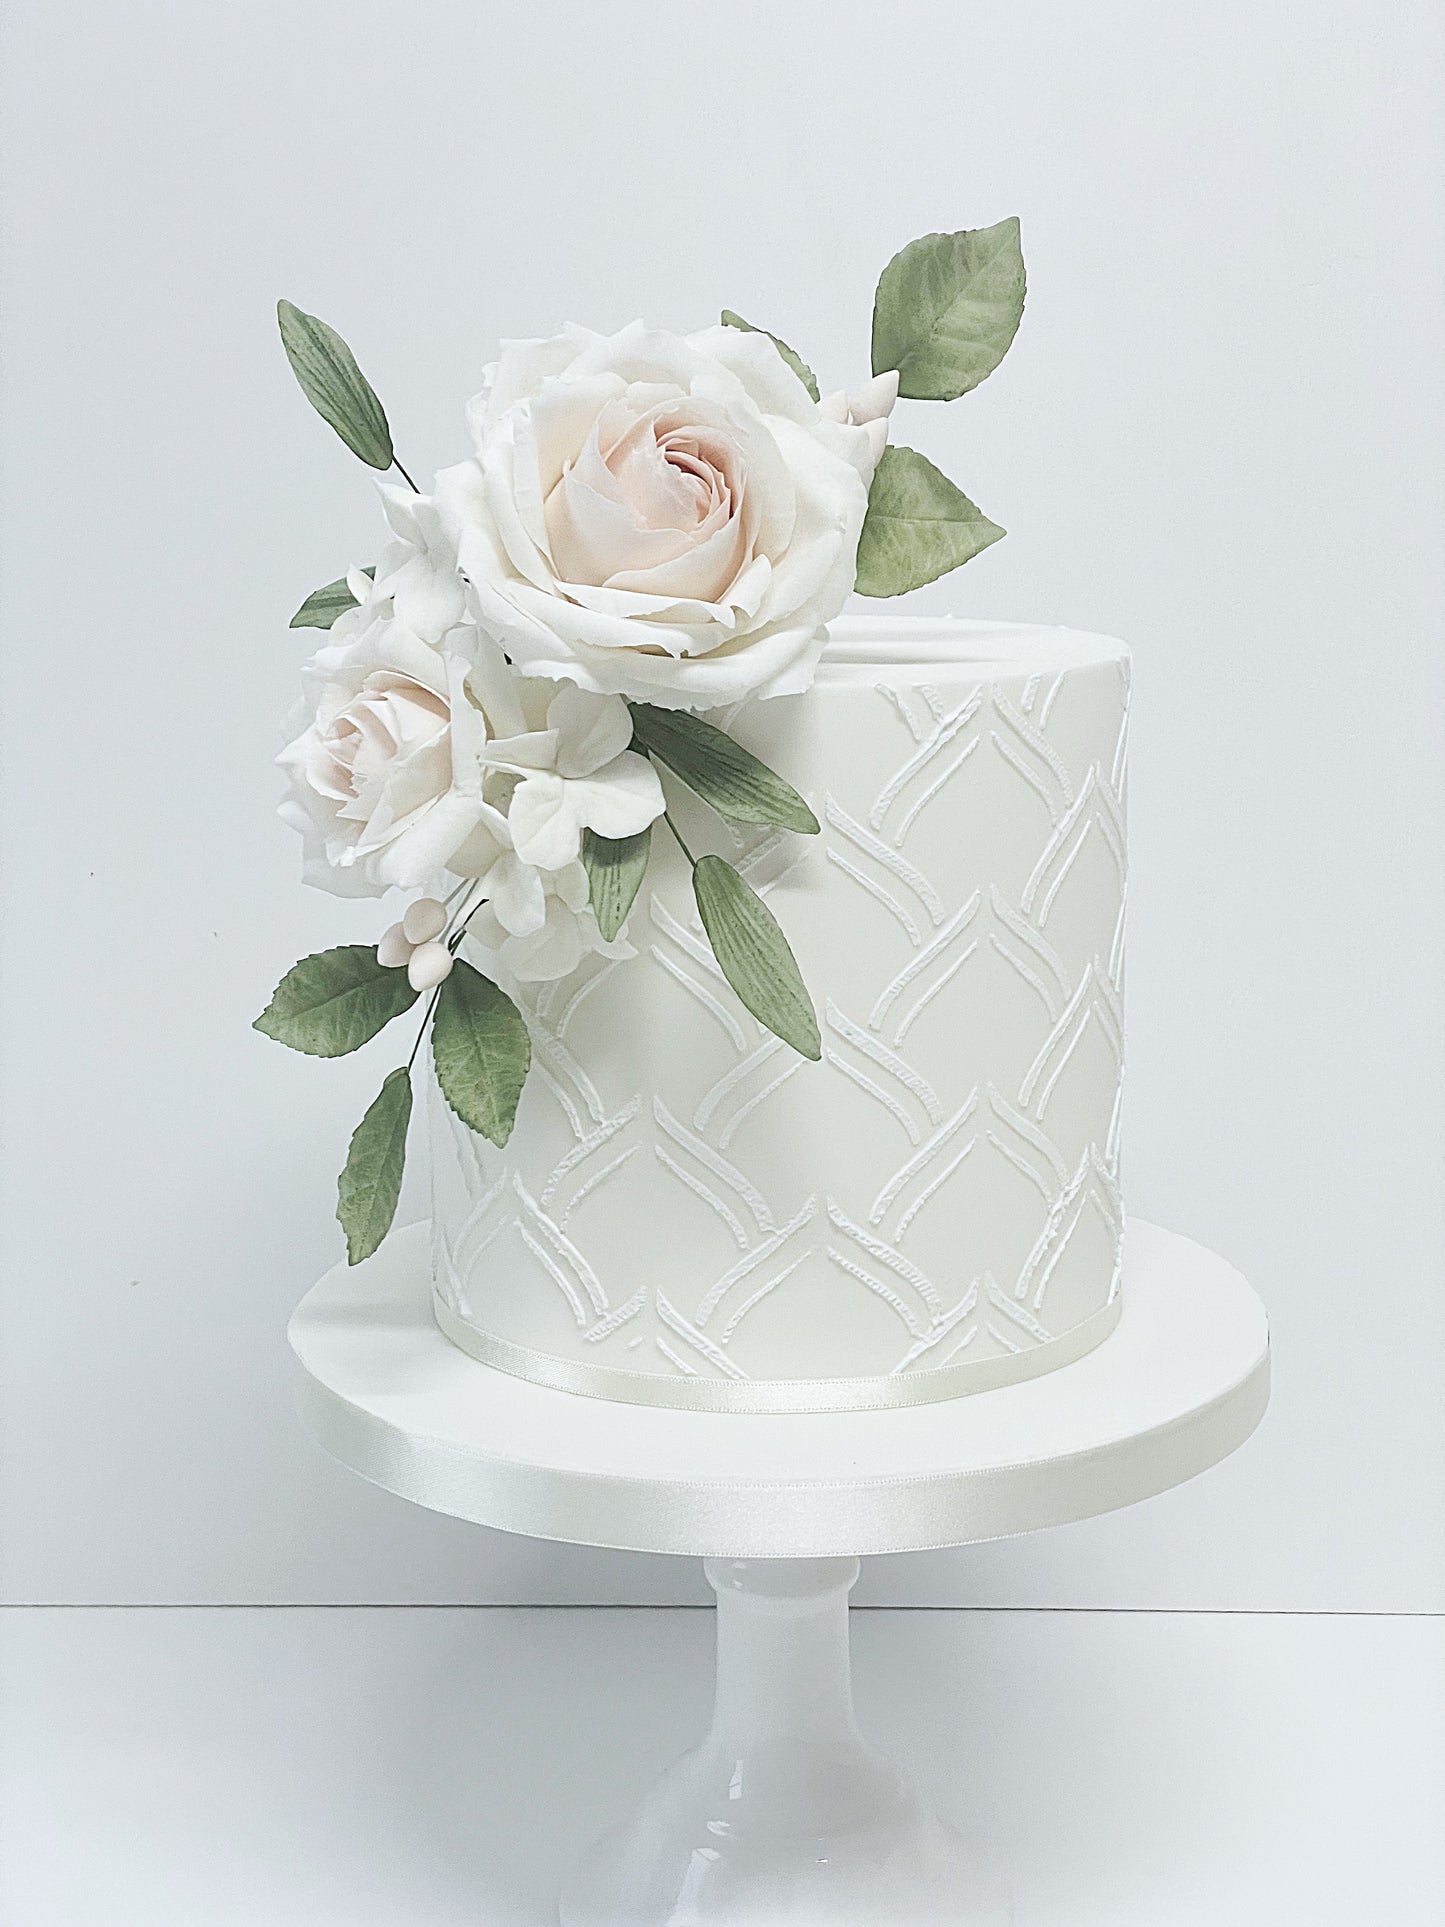 SIGNATURE SUGAR FLOWER ROSE, FILLER, FOLIAGE & STENCILLING CAKE DECORATING CLASS SCOTLAND IN PERSON  - SUNDAY 17TH SEPTEMBER